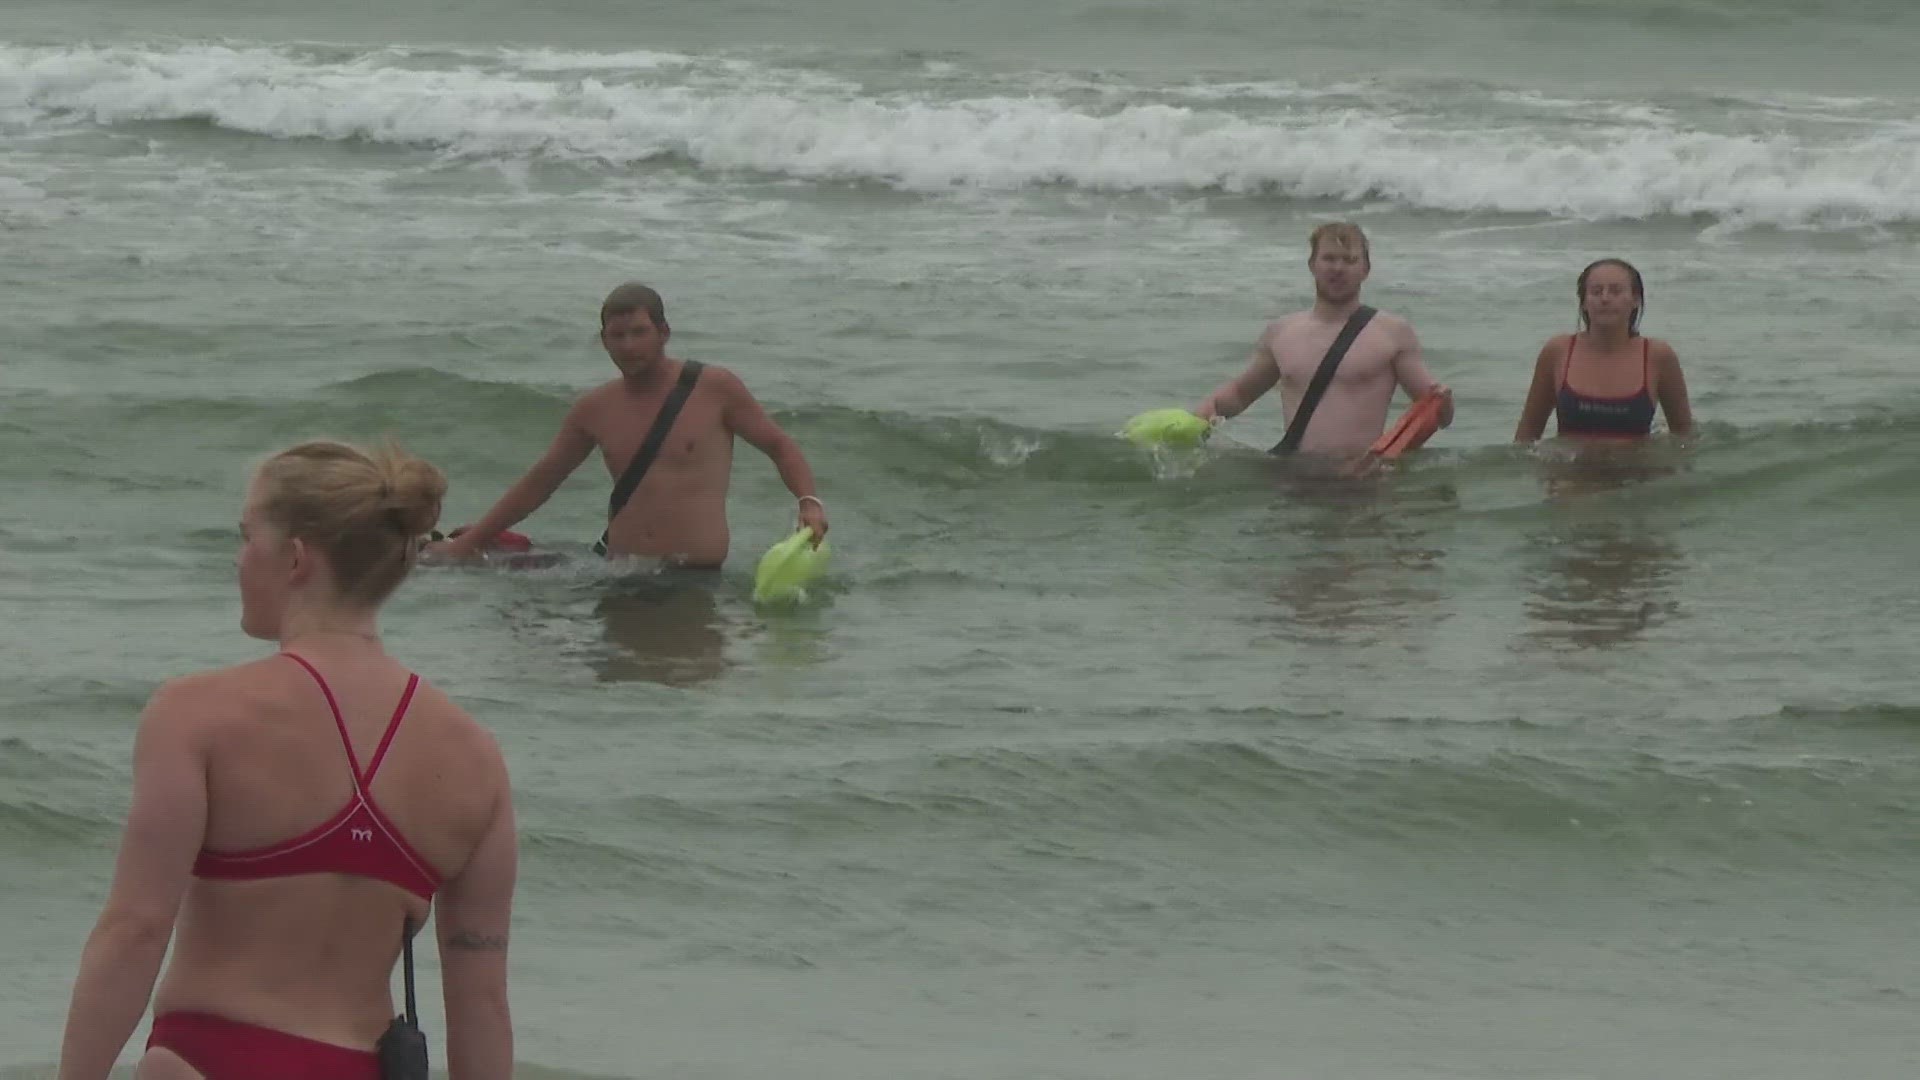 Ninety-nine percent of rescues are related to rip currents, and lifeguards at Old Orchard Beach say they have already recused 20 people in the past month.